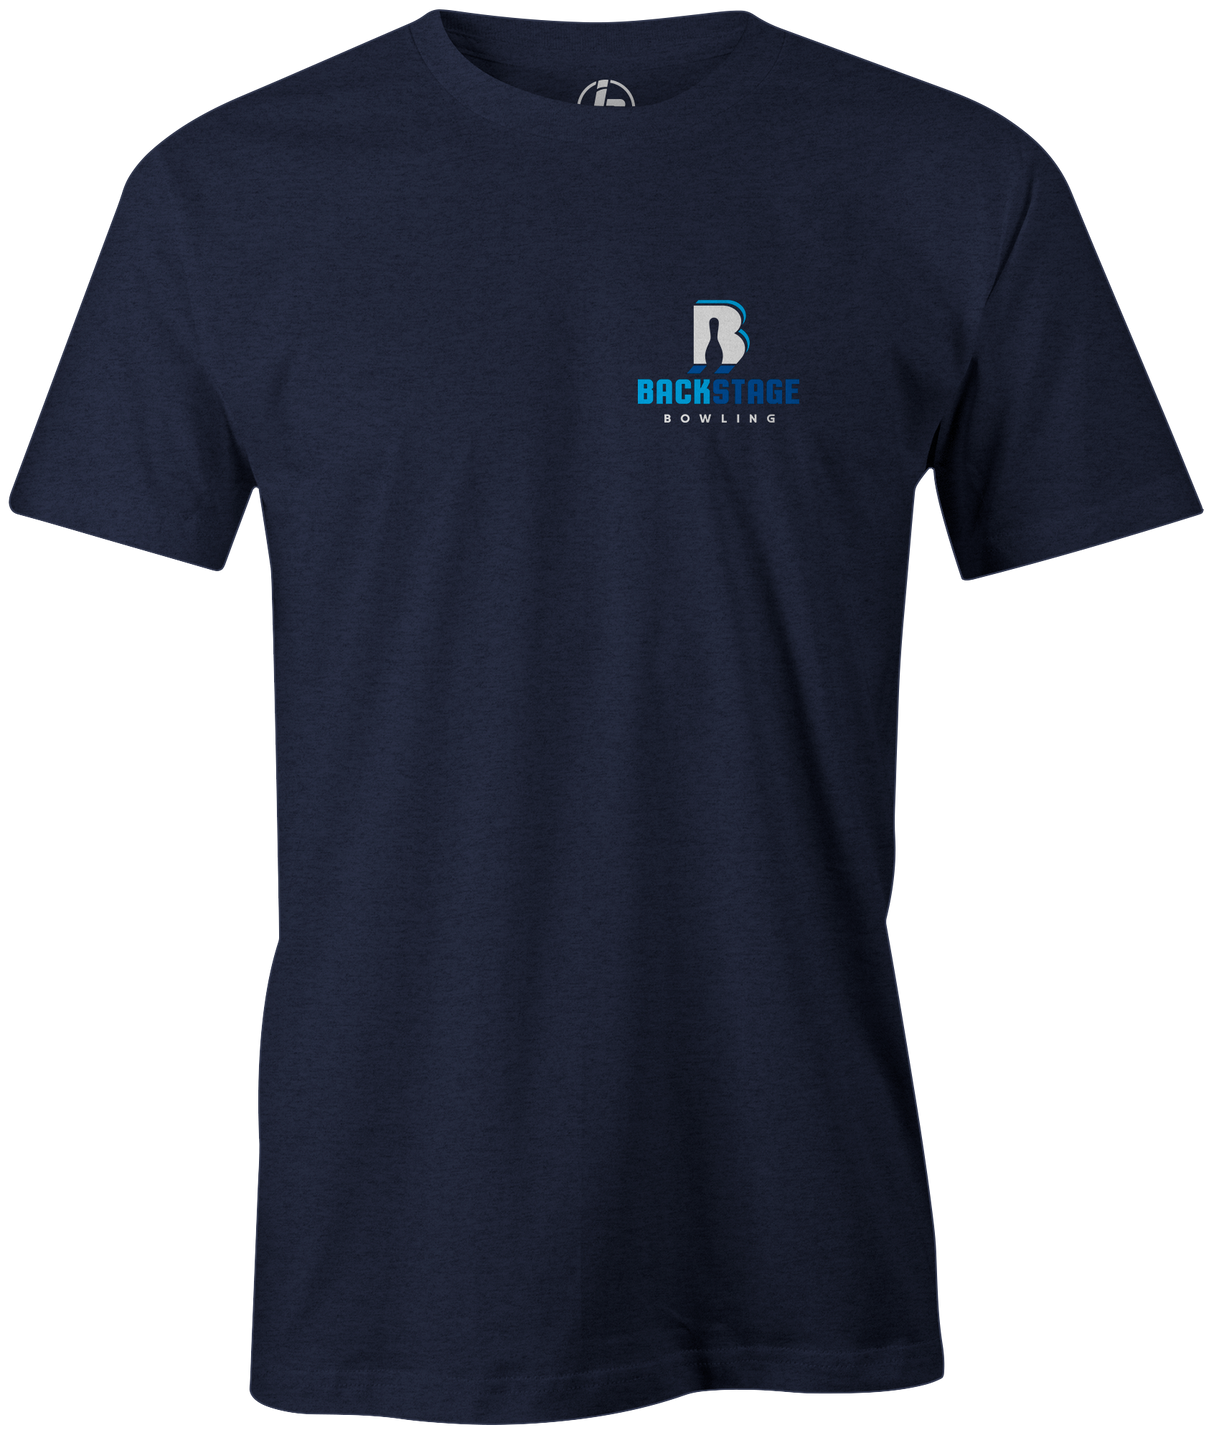 Backstage Bowling T-shirt, men's, navy, tee, tee-shirt, t shirt, apparel, merch, practice, lanes, free shipping, discount, cheap, coupon, shannon o'keefe, bryan o'keefe, mike jasnau, mike shady, coaching, membership, cool, vintage, authentic, original